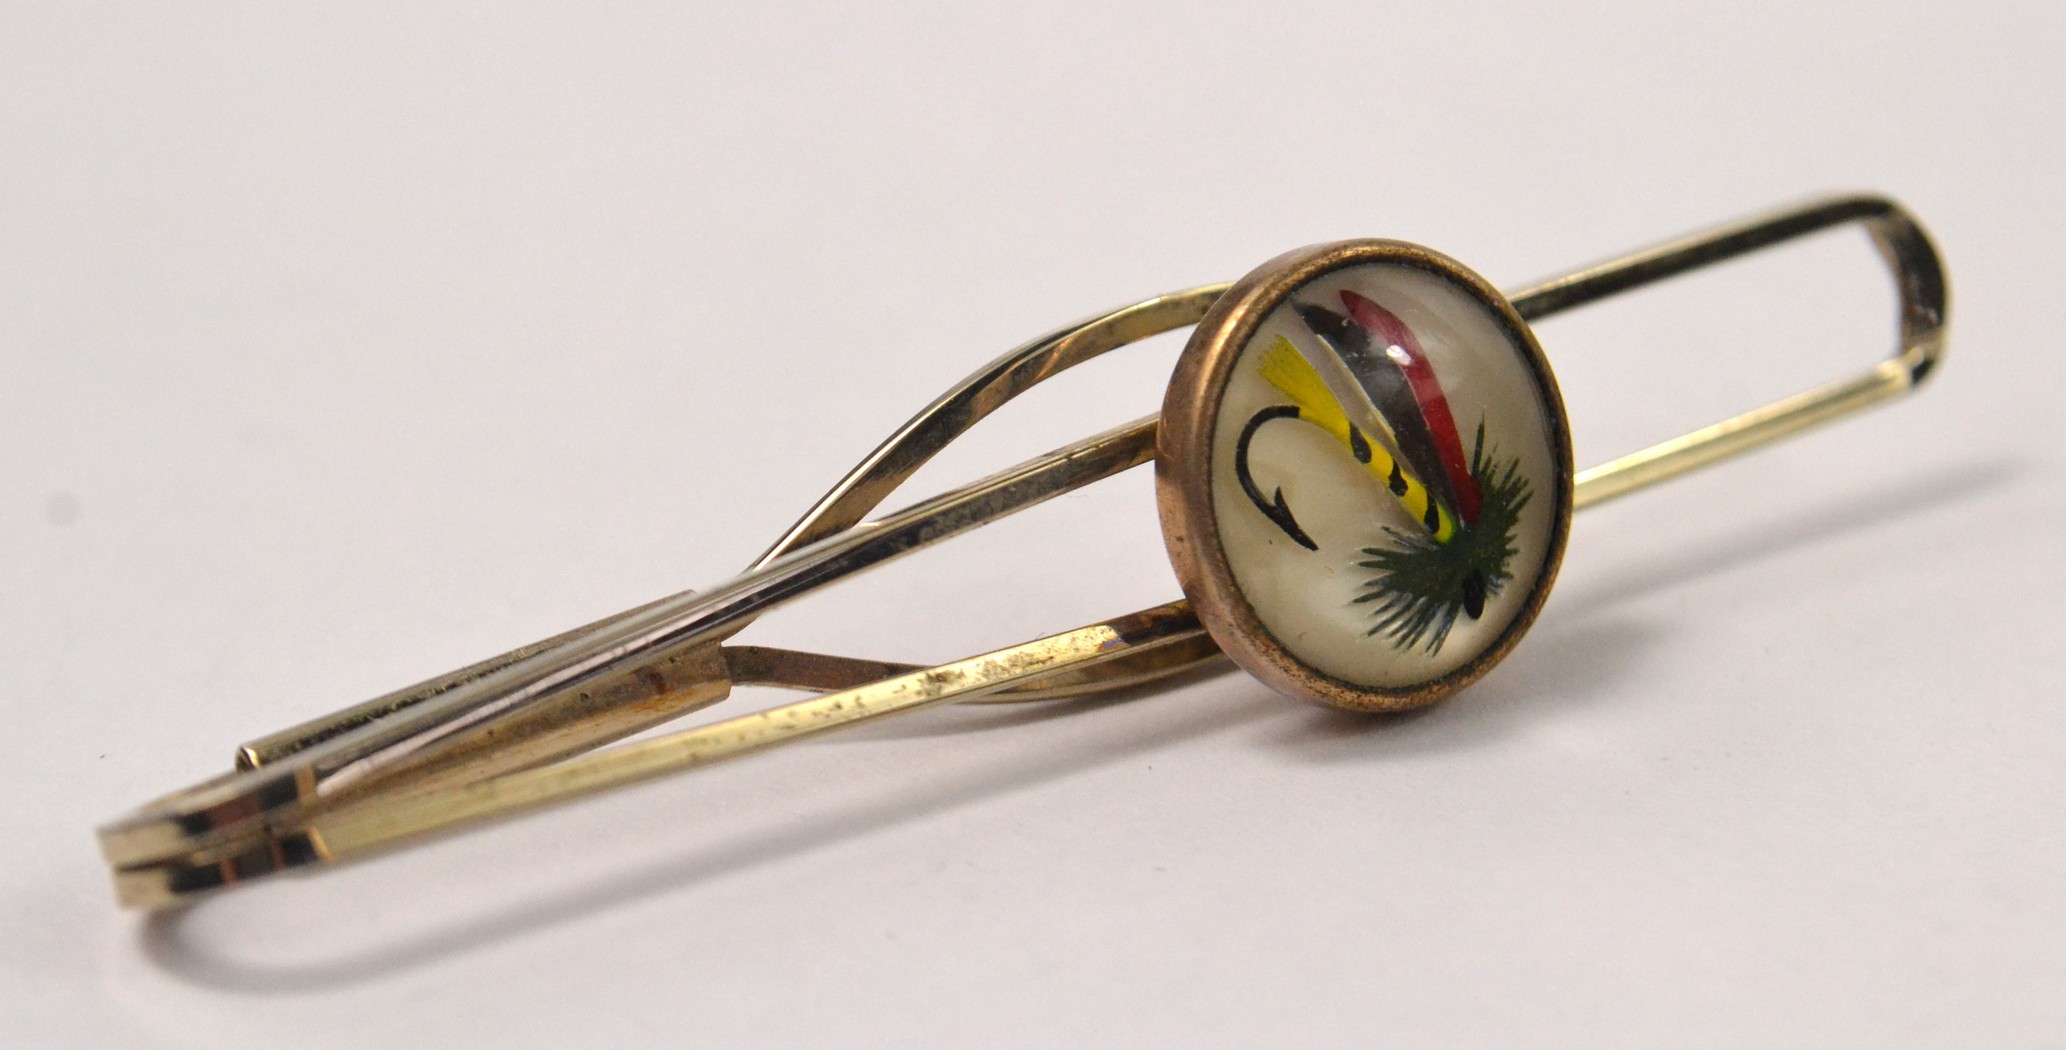 RARE 'FOR THE ANGLER AT HEART' A pair of vintage cufflinks and a matching tie-pin depicting - Image 9 of 9